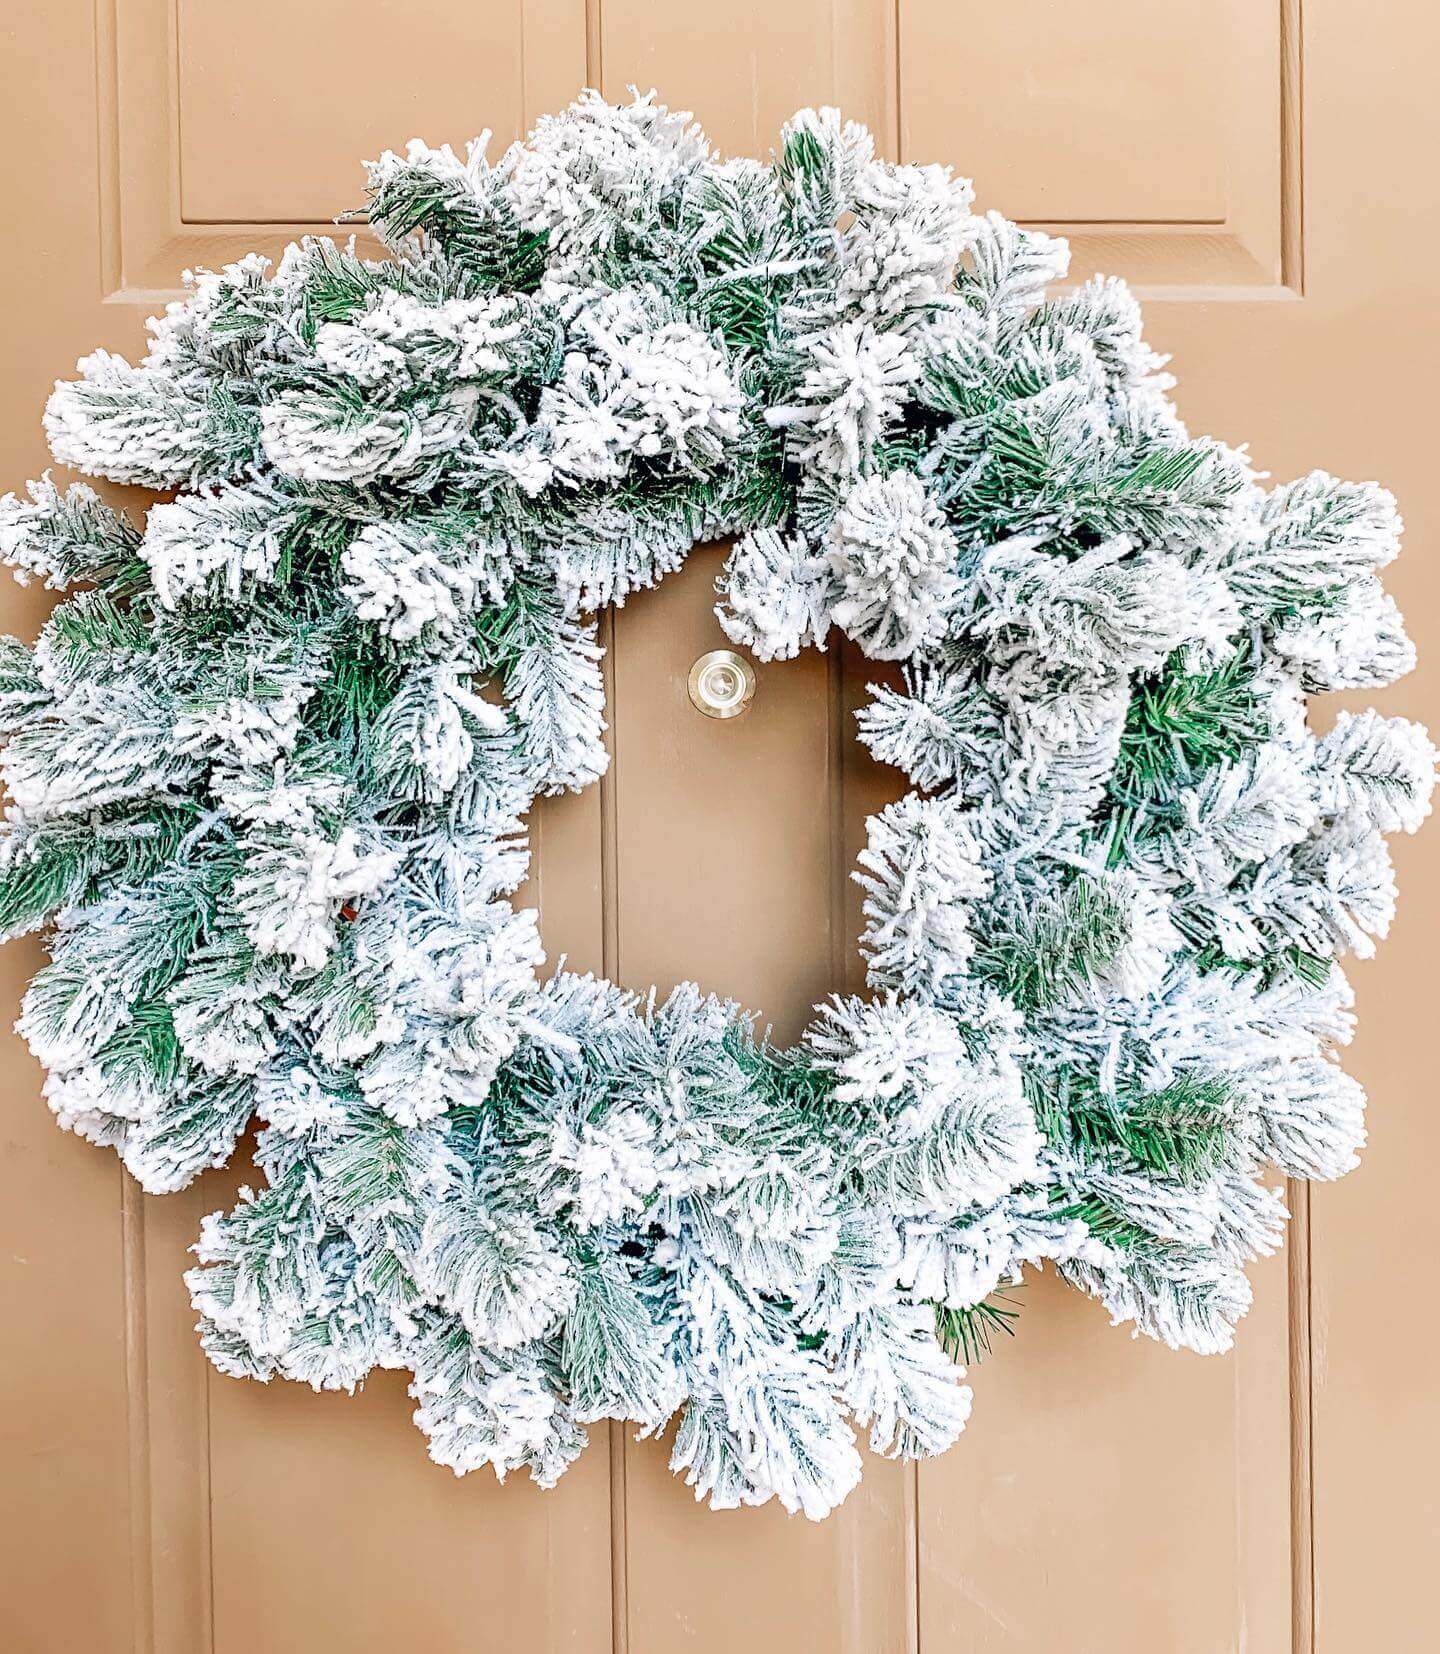 King of Christmas 36″ King Flock Wreath With 150 Warm White LED Lights (Plug Operated)